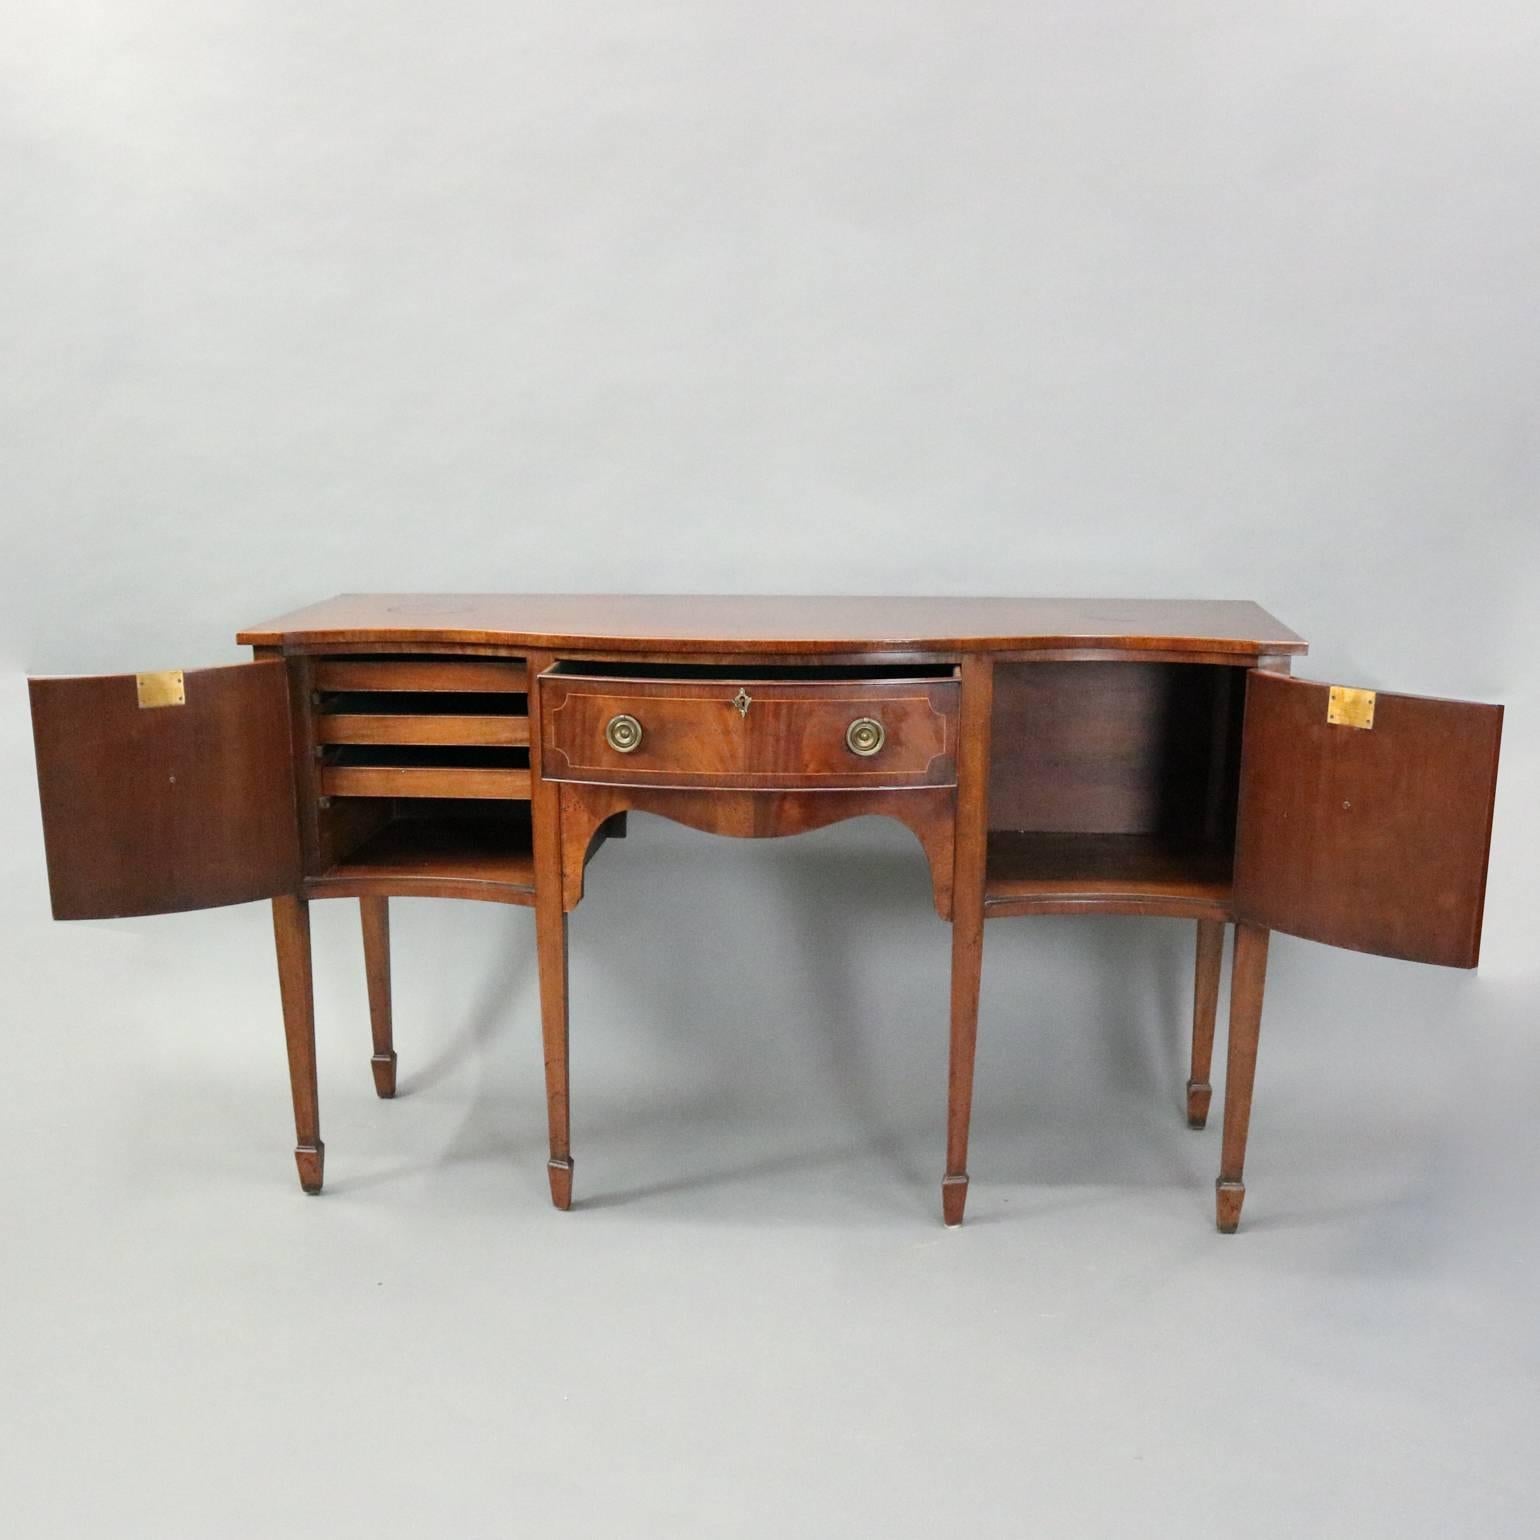 Vintage Federal style mahogany sideboard features serpentine front with satinwood banding, bronze pulls, circa 1930

Measures: 35.5" H x 59.5" W x 22.25" D.